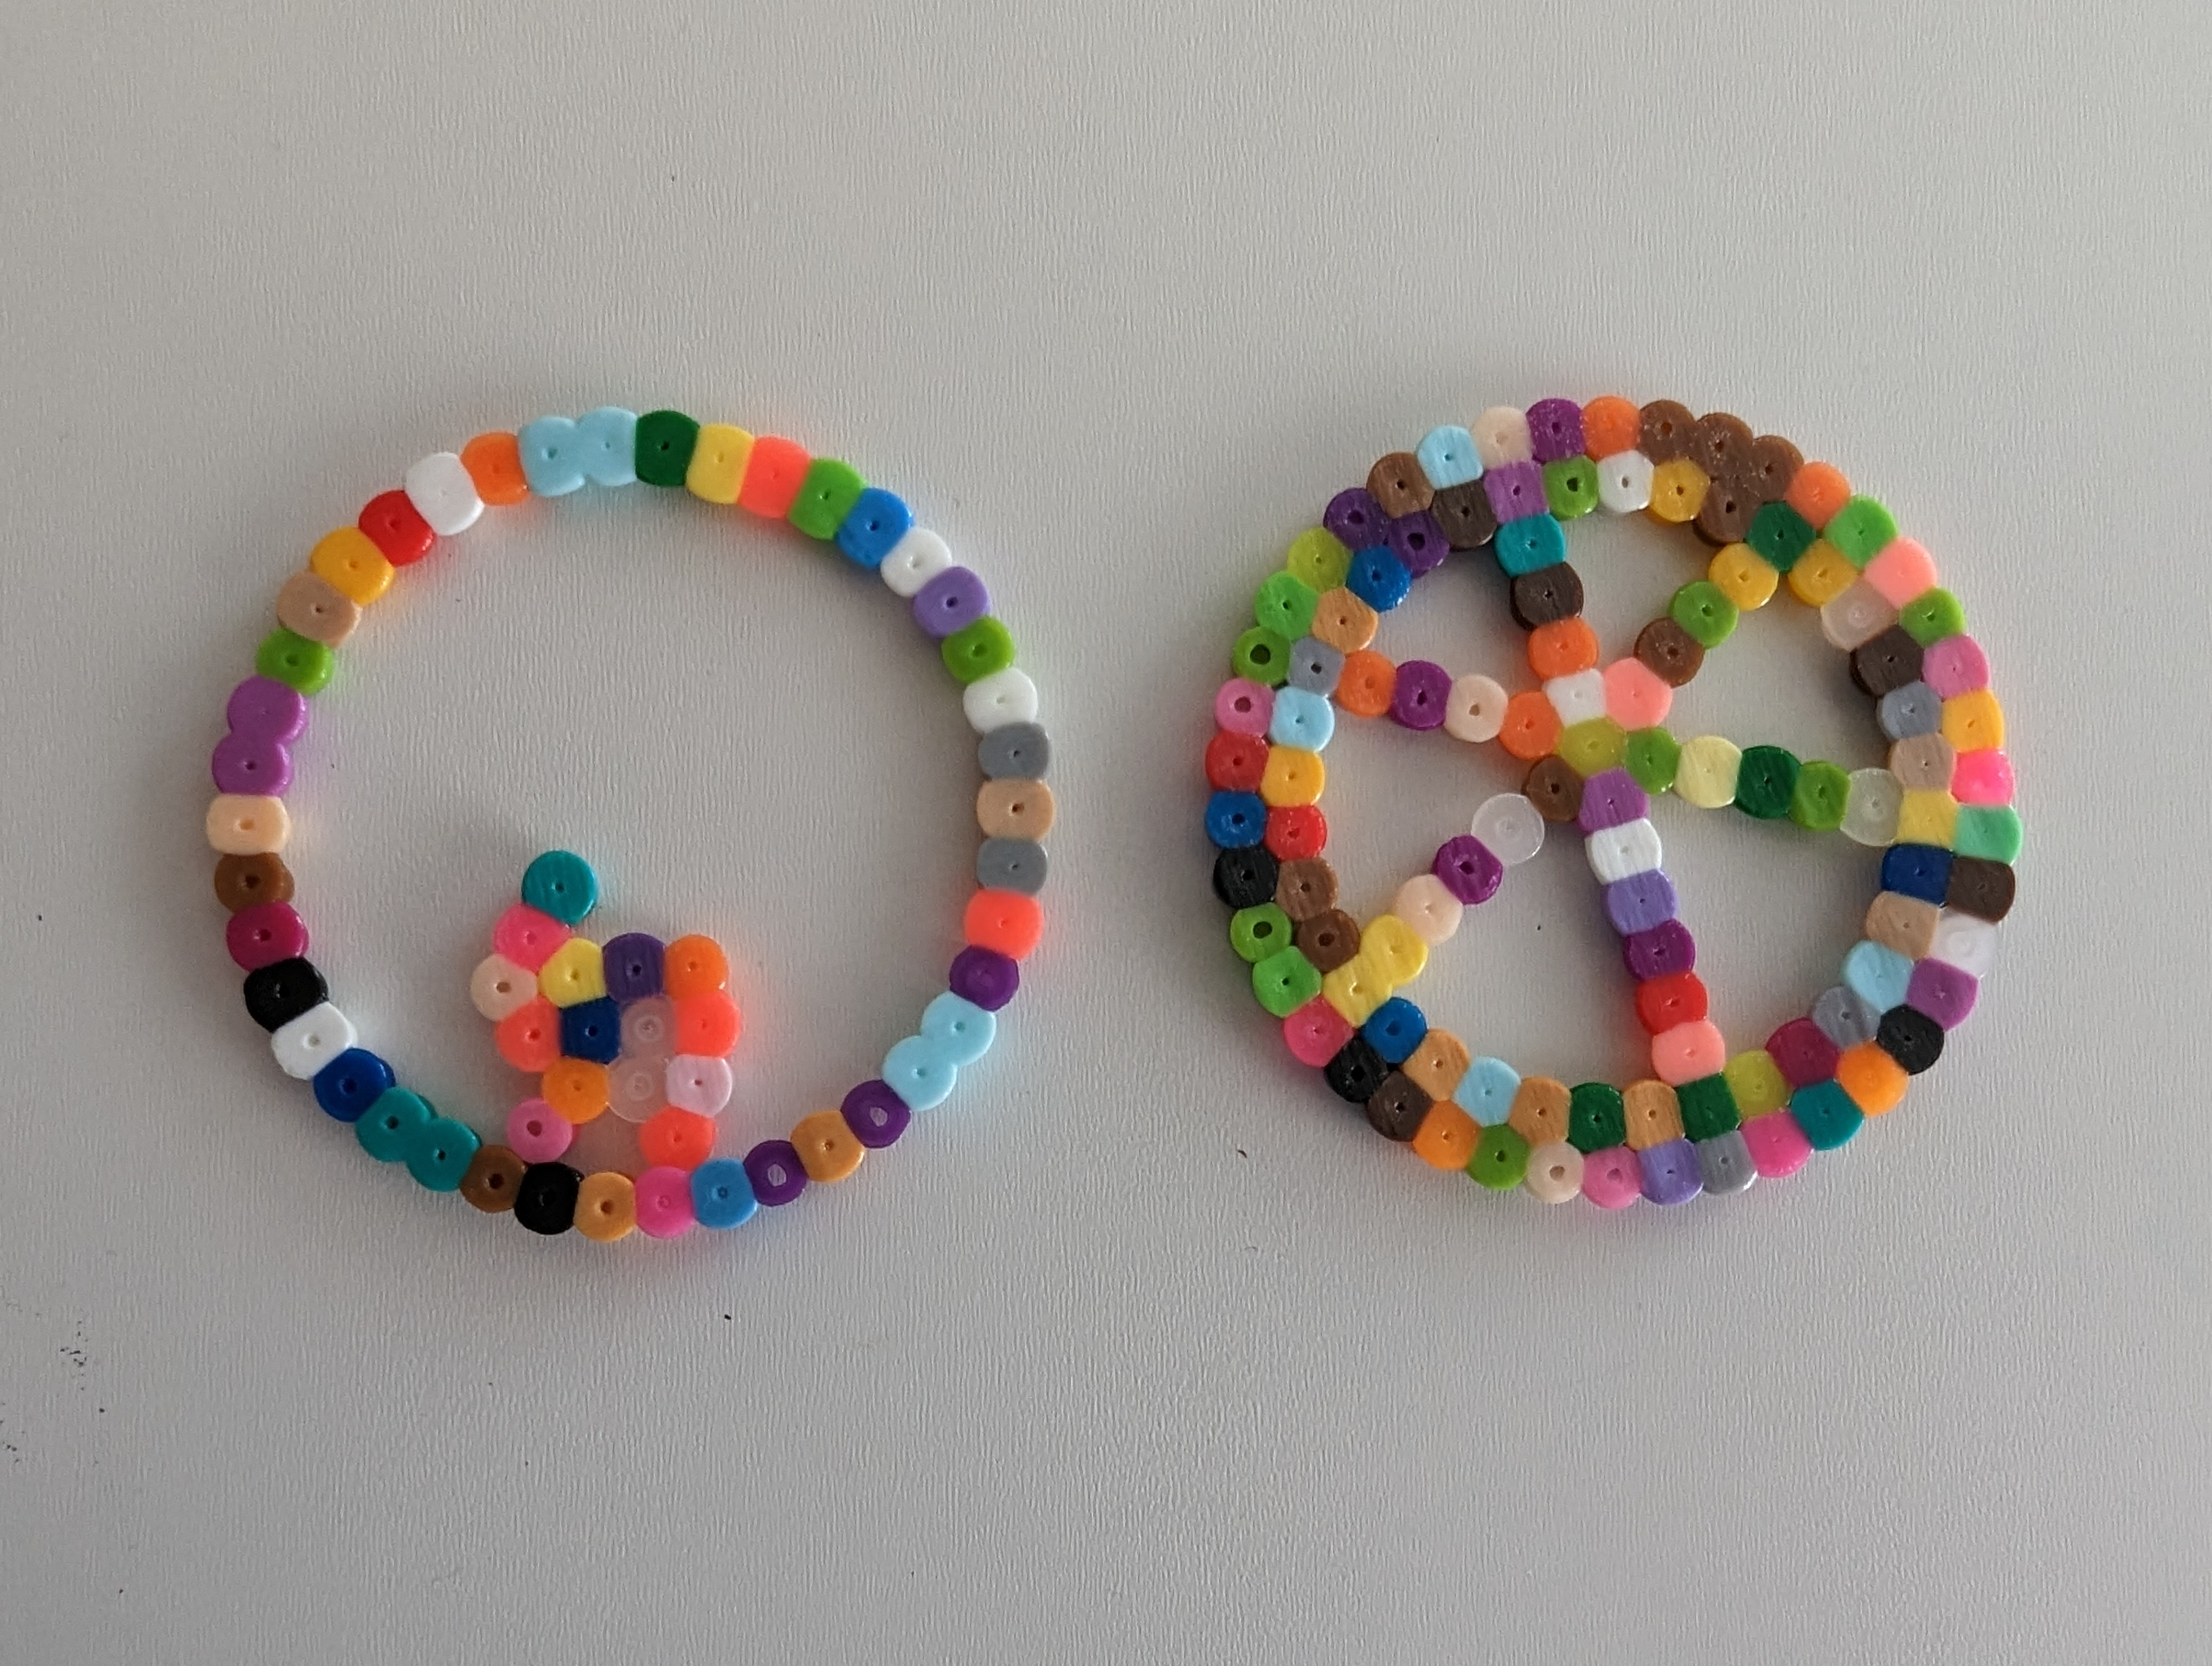 A hamster in a wheel and a wheel with spokes in Perler beads